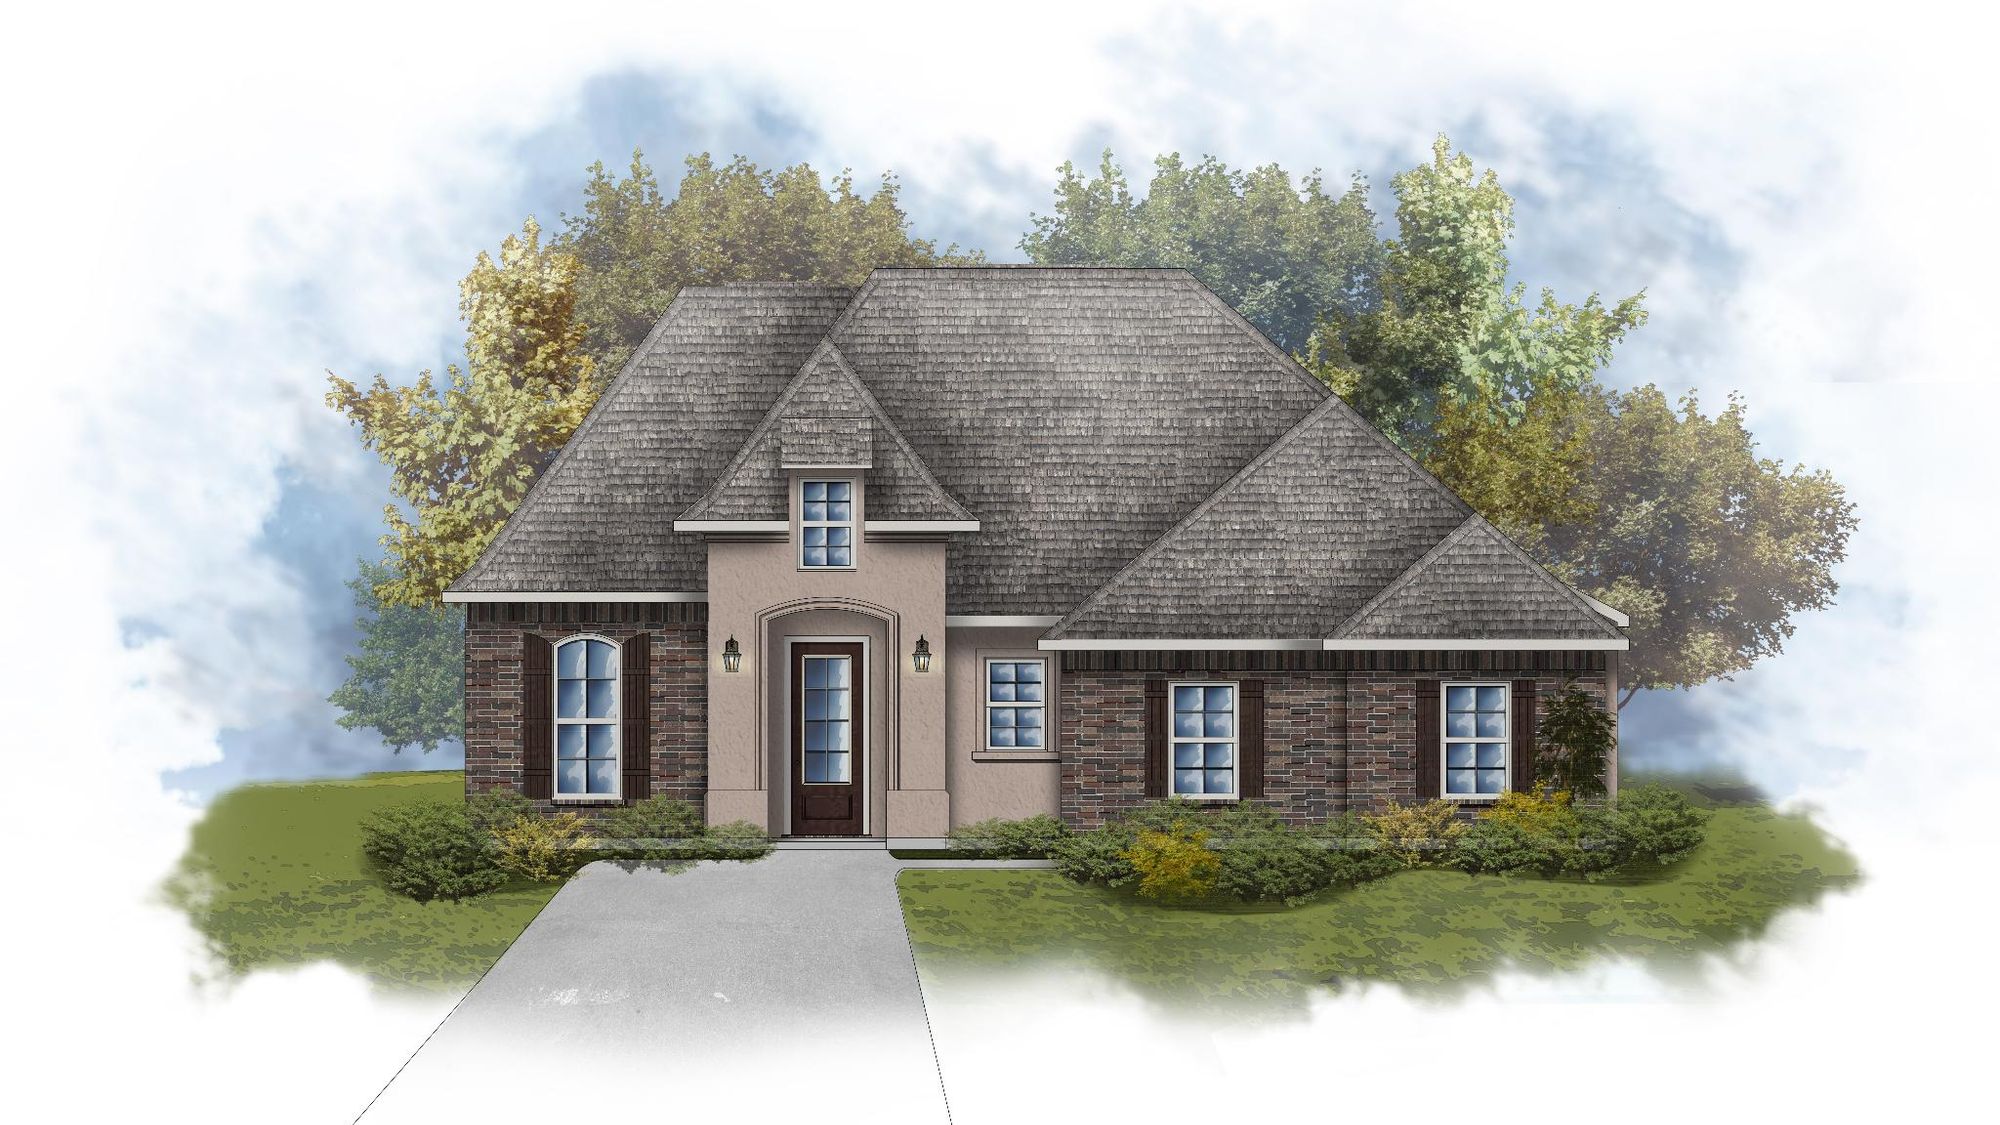 Lacombe III A - Open Floor Plan - DSLD Homes